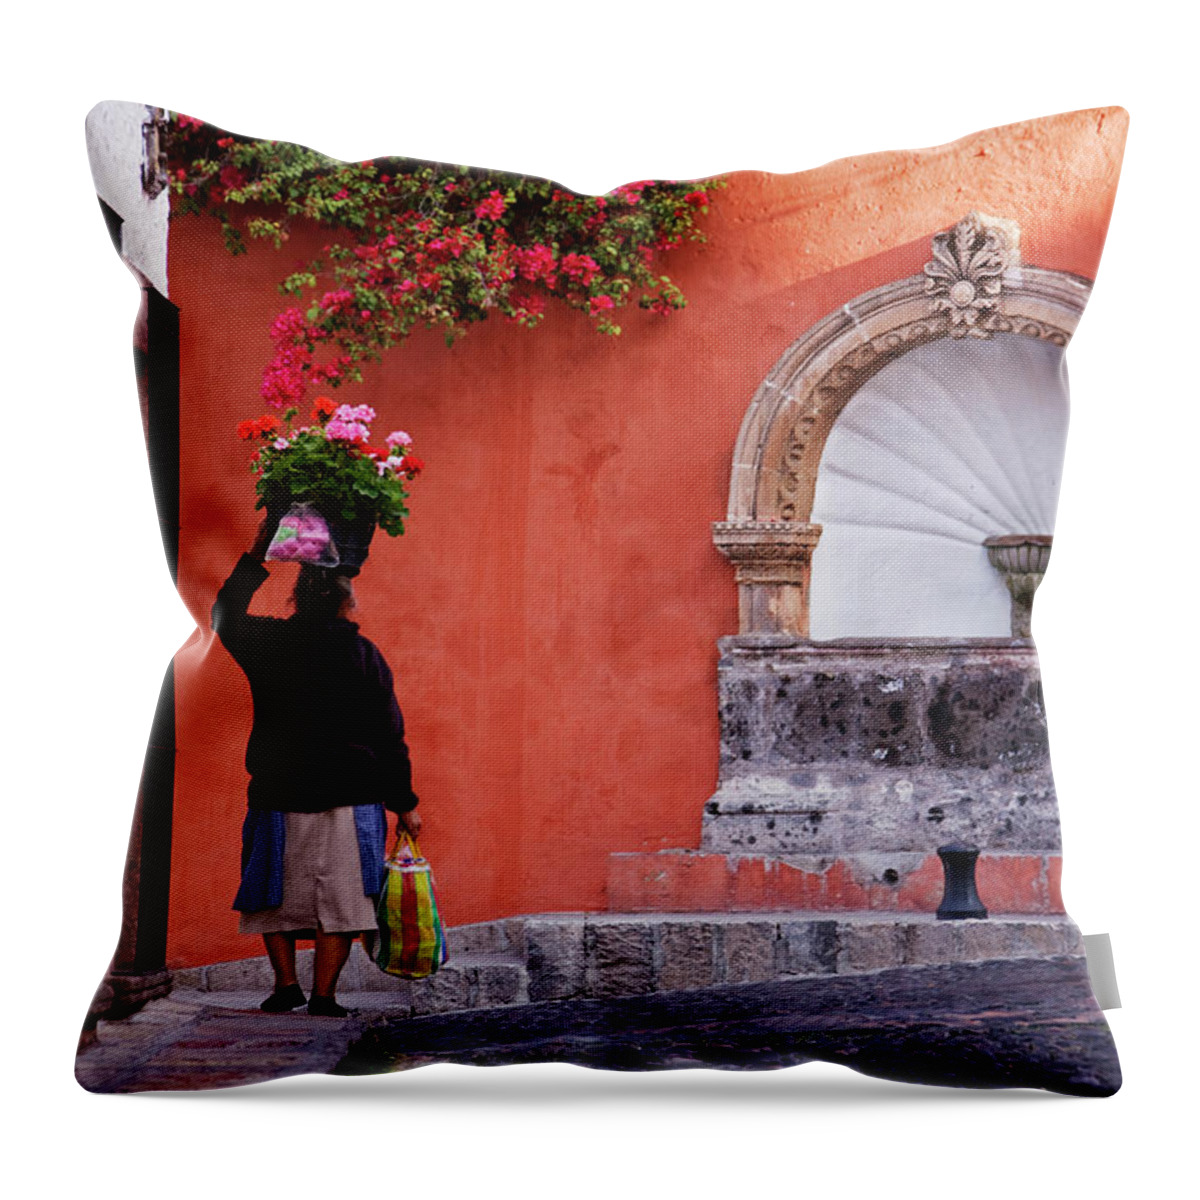 Arch Throw Pillow featuring the photograph Woman Carrying Flowers On Her Head On by Pixelchrome Inc